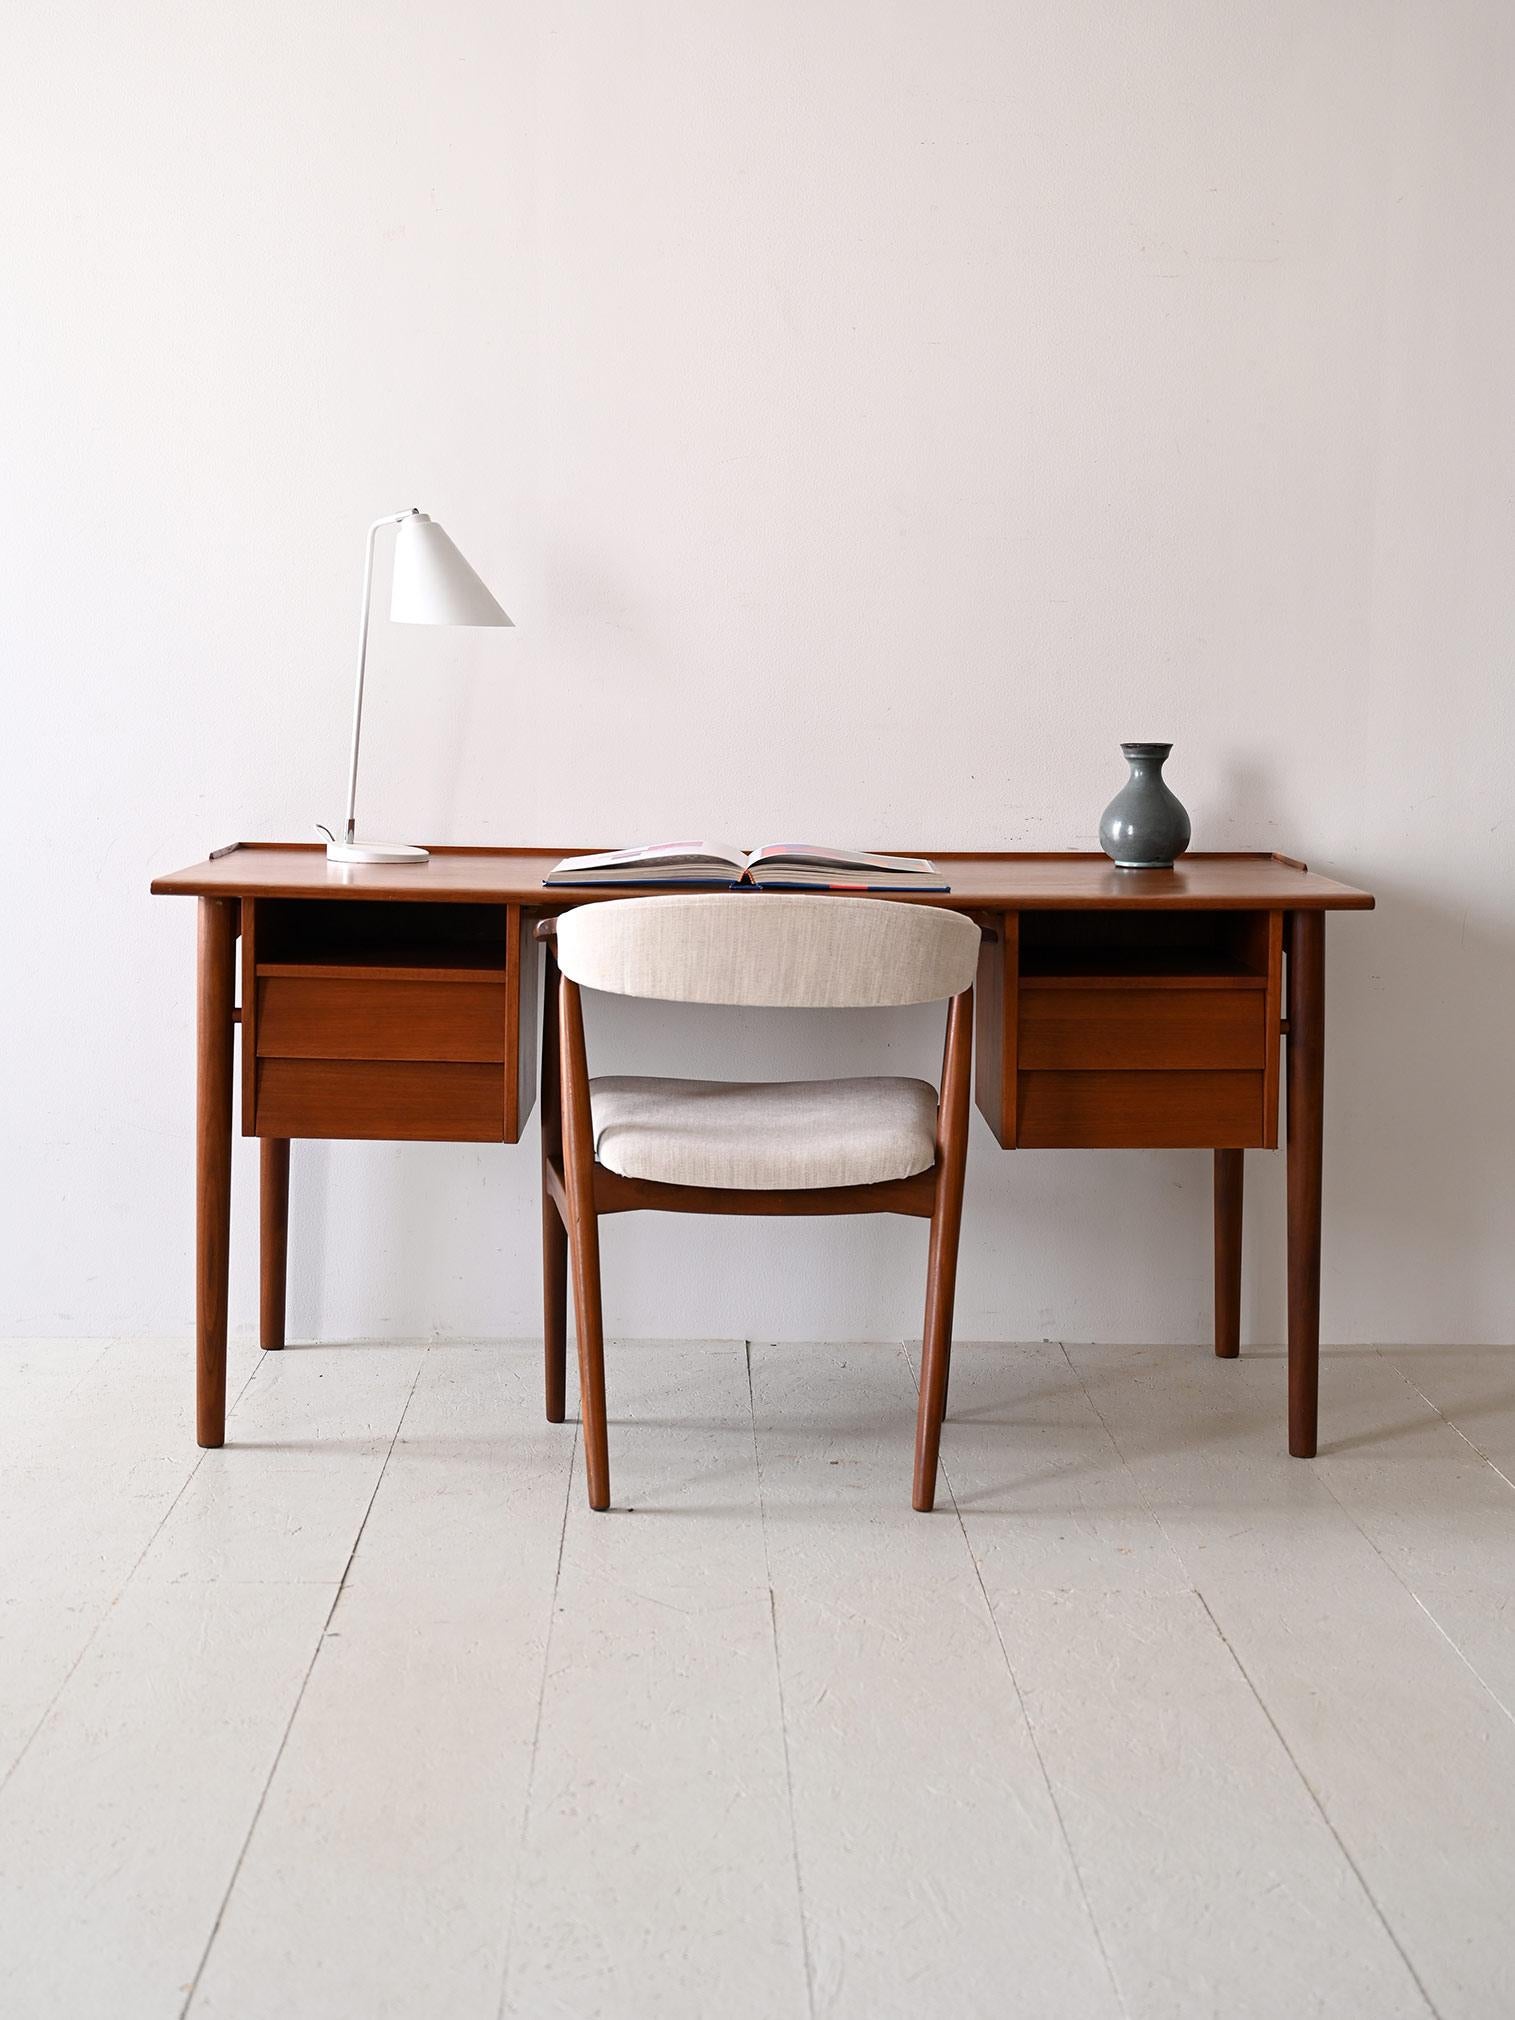 Vintage teak office table.

This Scandinavian desk produced in the 1960s, with its clean design and fine lines, exemplifies functionality and elegance. 
Consisting of a wide work surface supported by round, tapered legs, it features elegant drawers